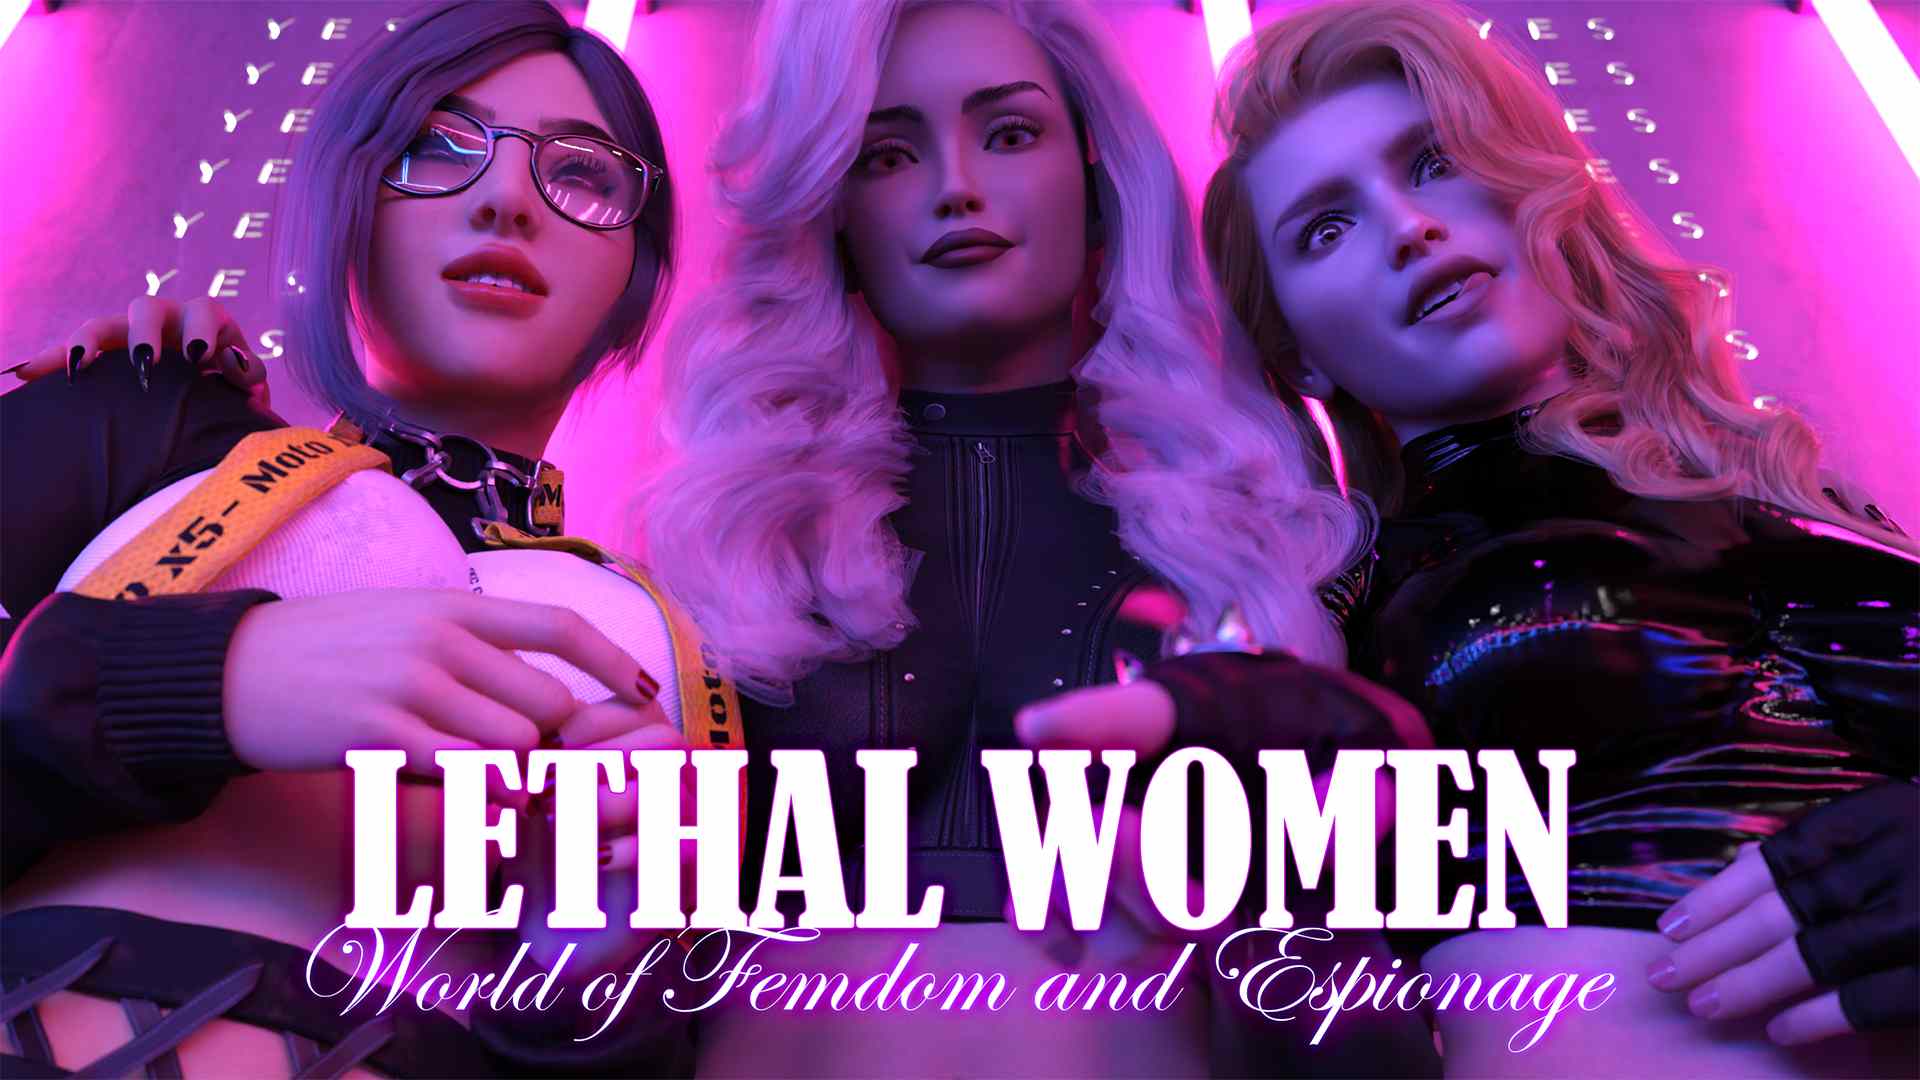 Lethal Women World of Femdom and Espionage [JMZ42 Games] Adult xxx Porn Game Download